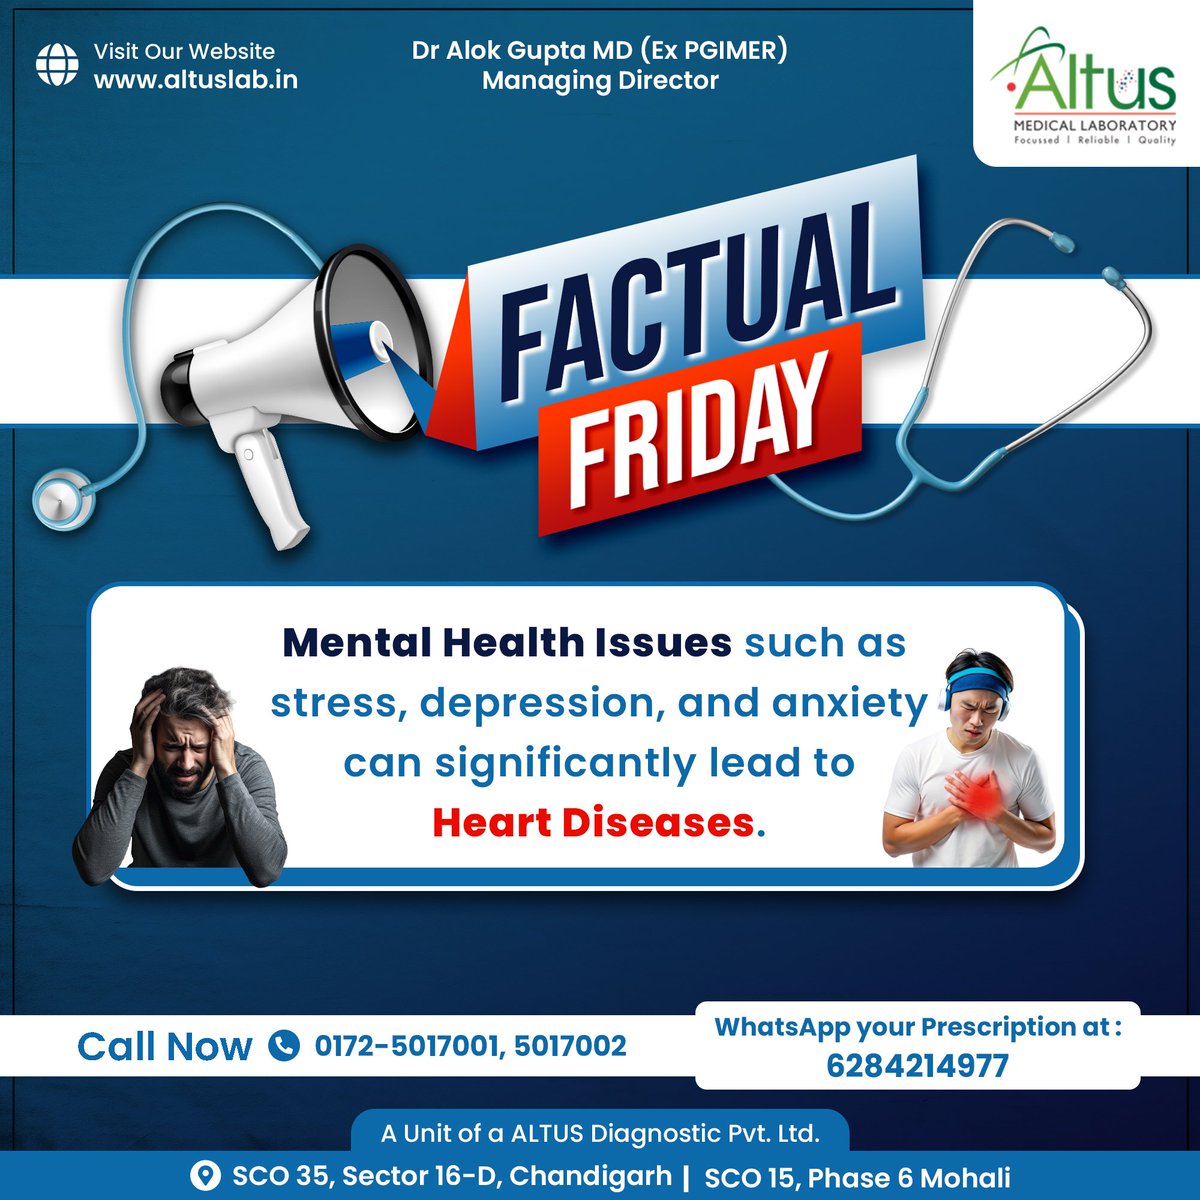 Did you know mental health issues like stress, depression, and anxiety can lead to heart diseases? Stay informed and visit our website for more details. #FactualFriday #MentalHealth #AltusLab